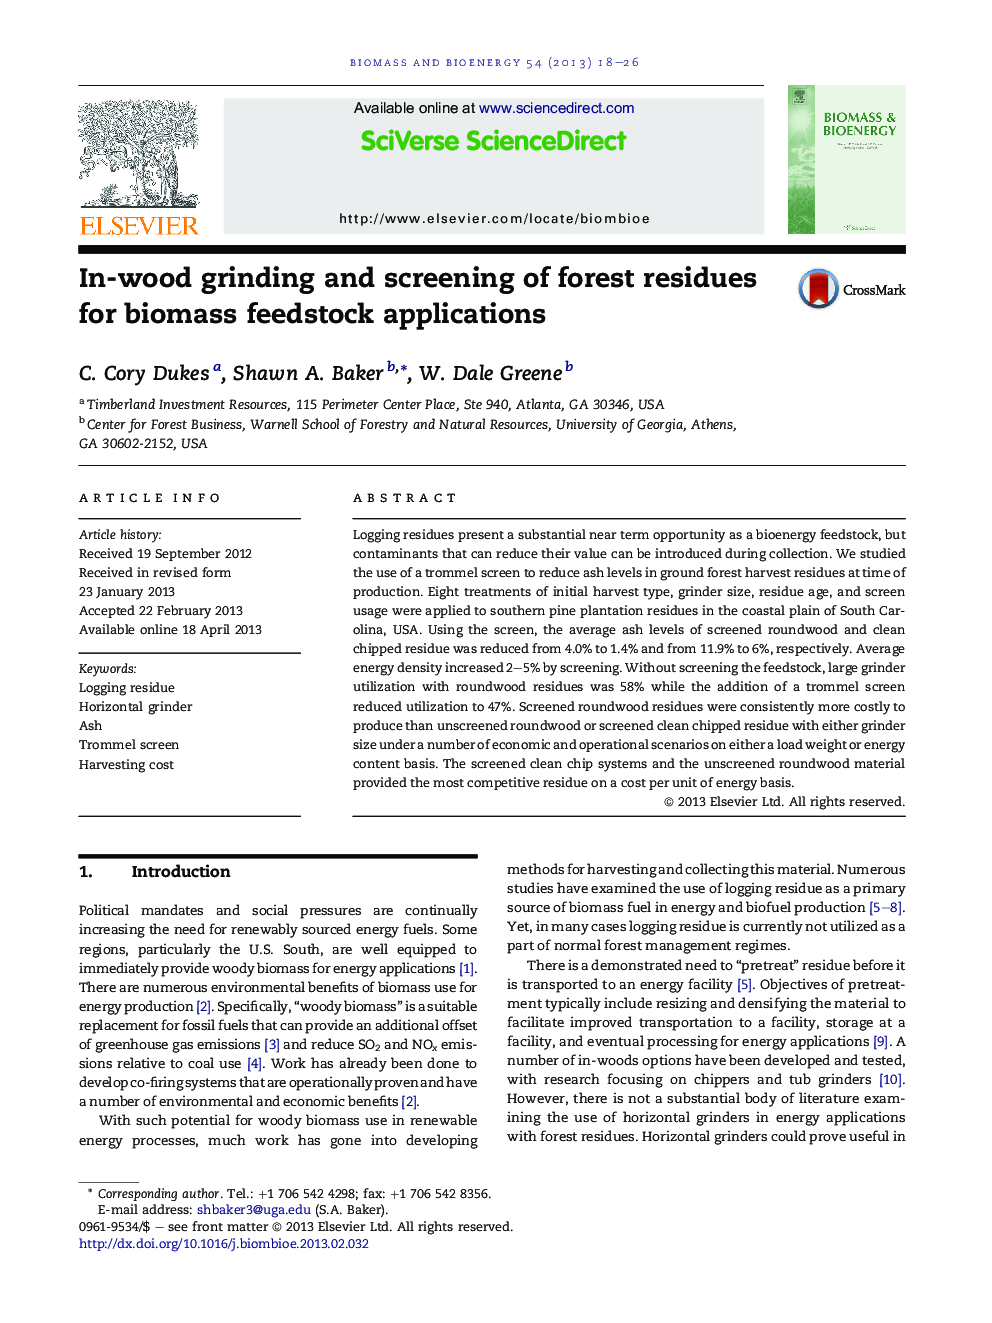 In-wood grinding and screening of forest residues for biomass feedstock applications